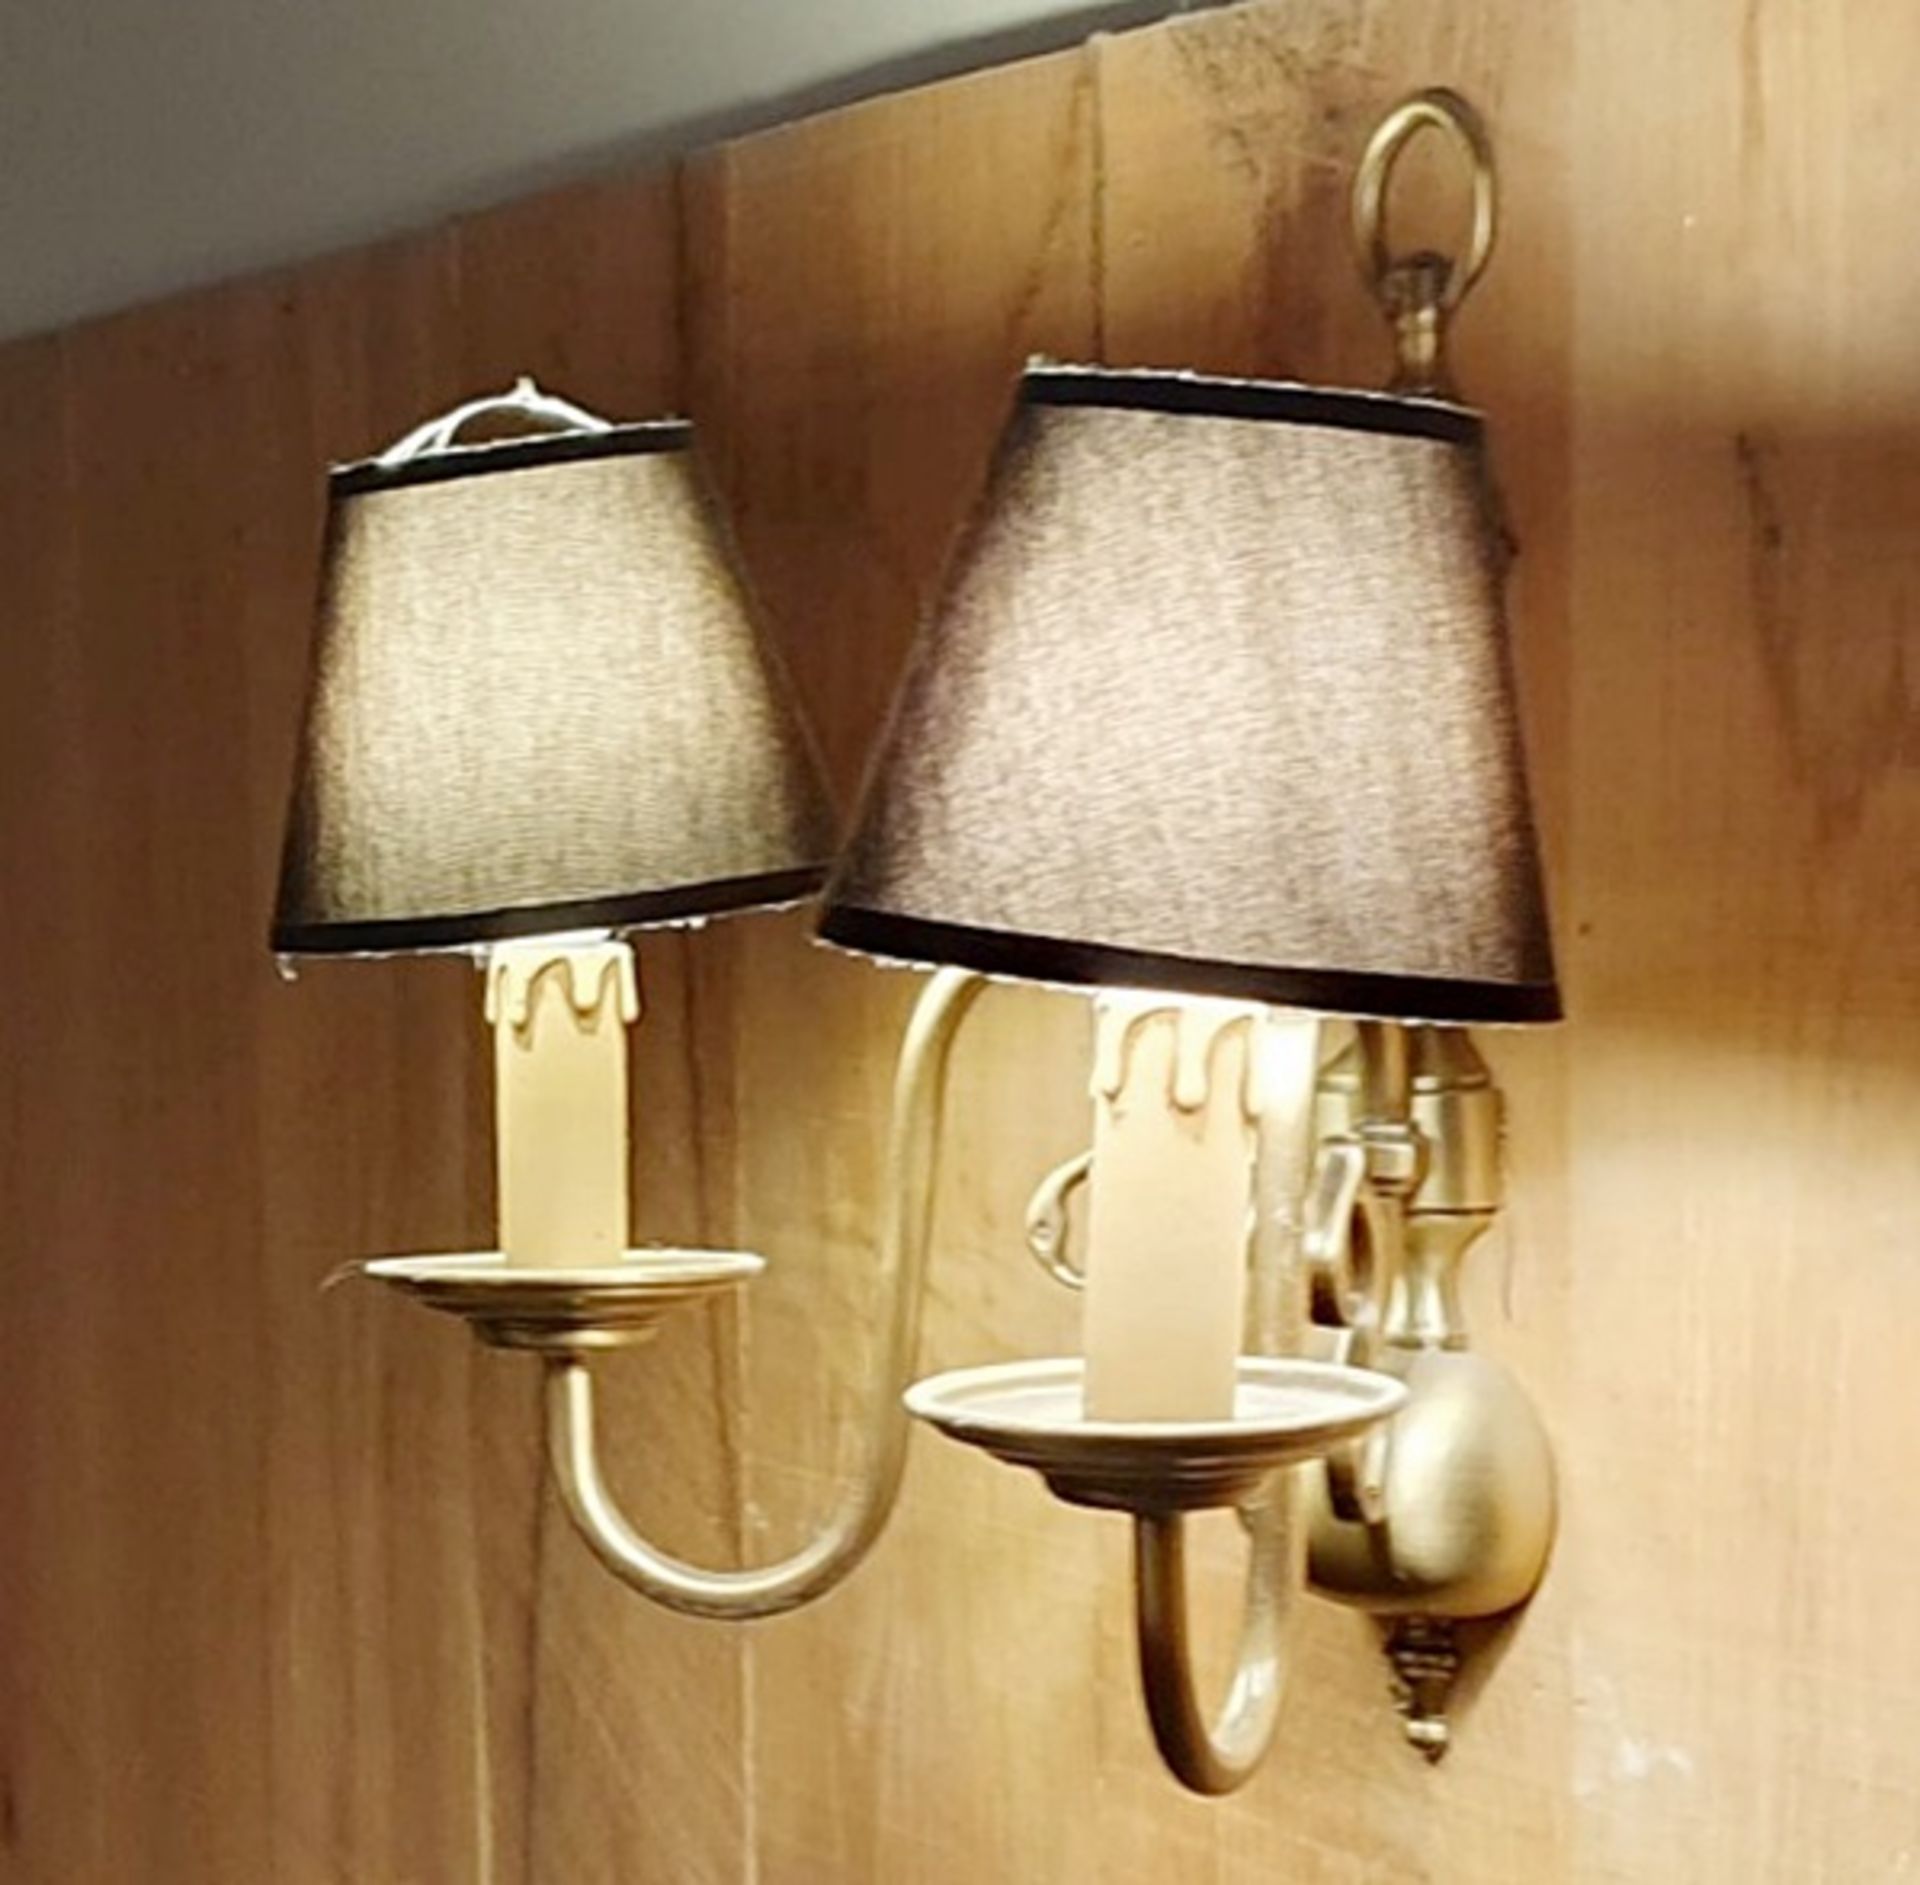 3 x Candle Style Wall Sconce Lights With Shaders - H34 x W37 x D20 cms Ref PA148 - CL463 - Location: - Image 2 of 2